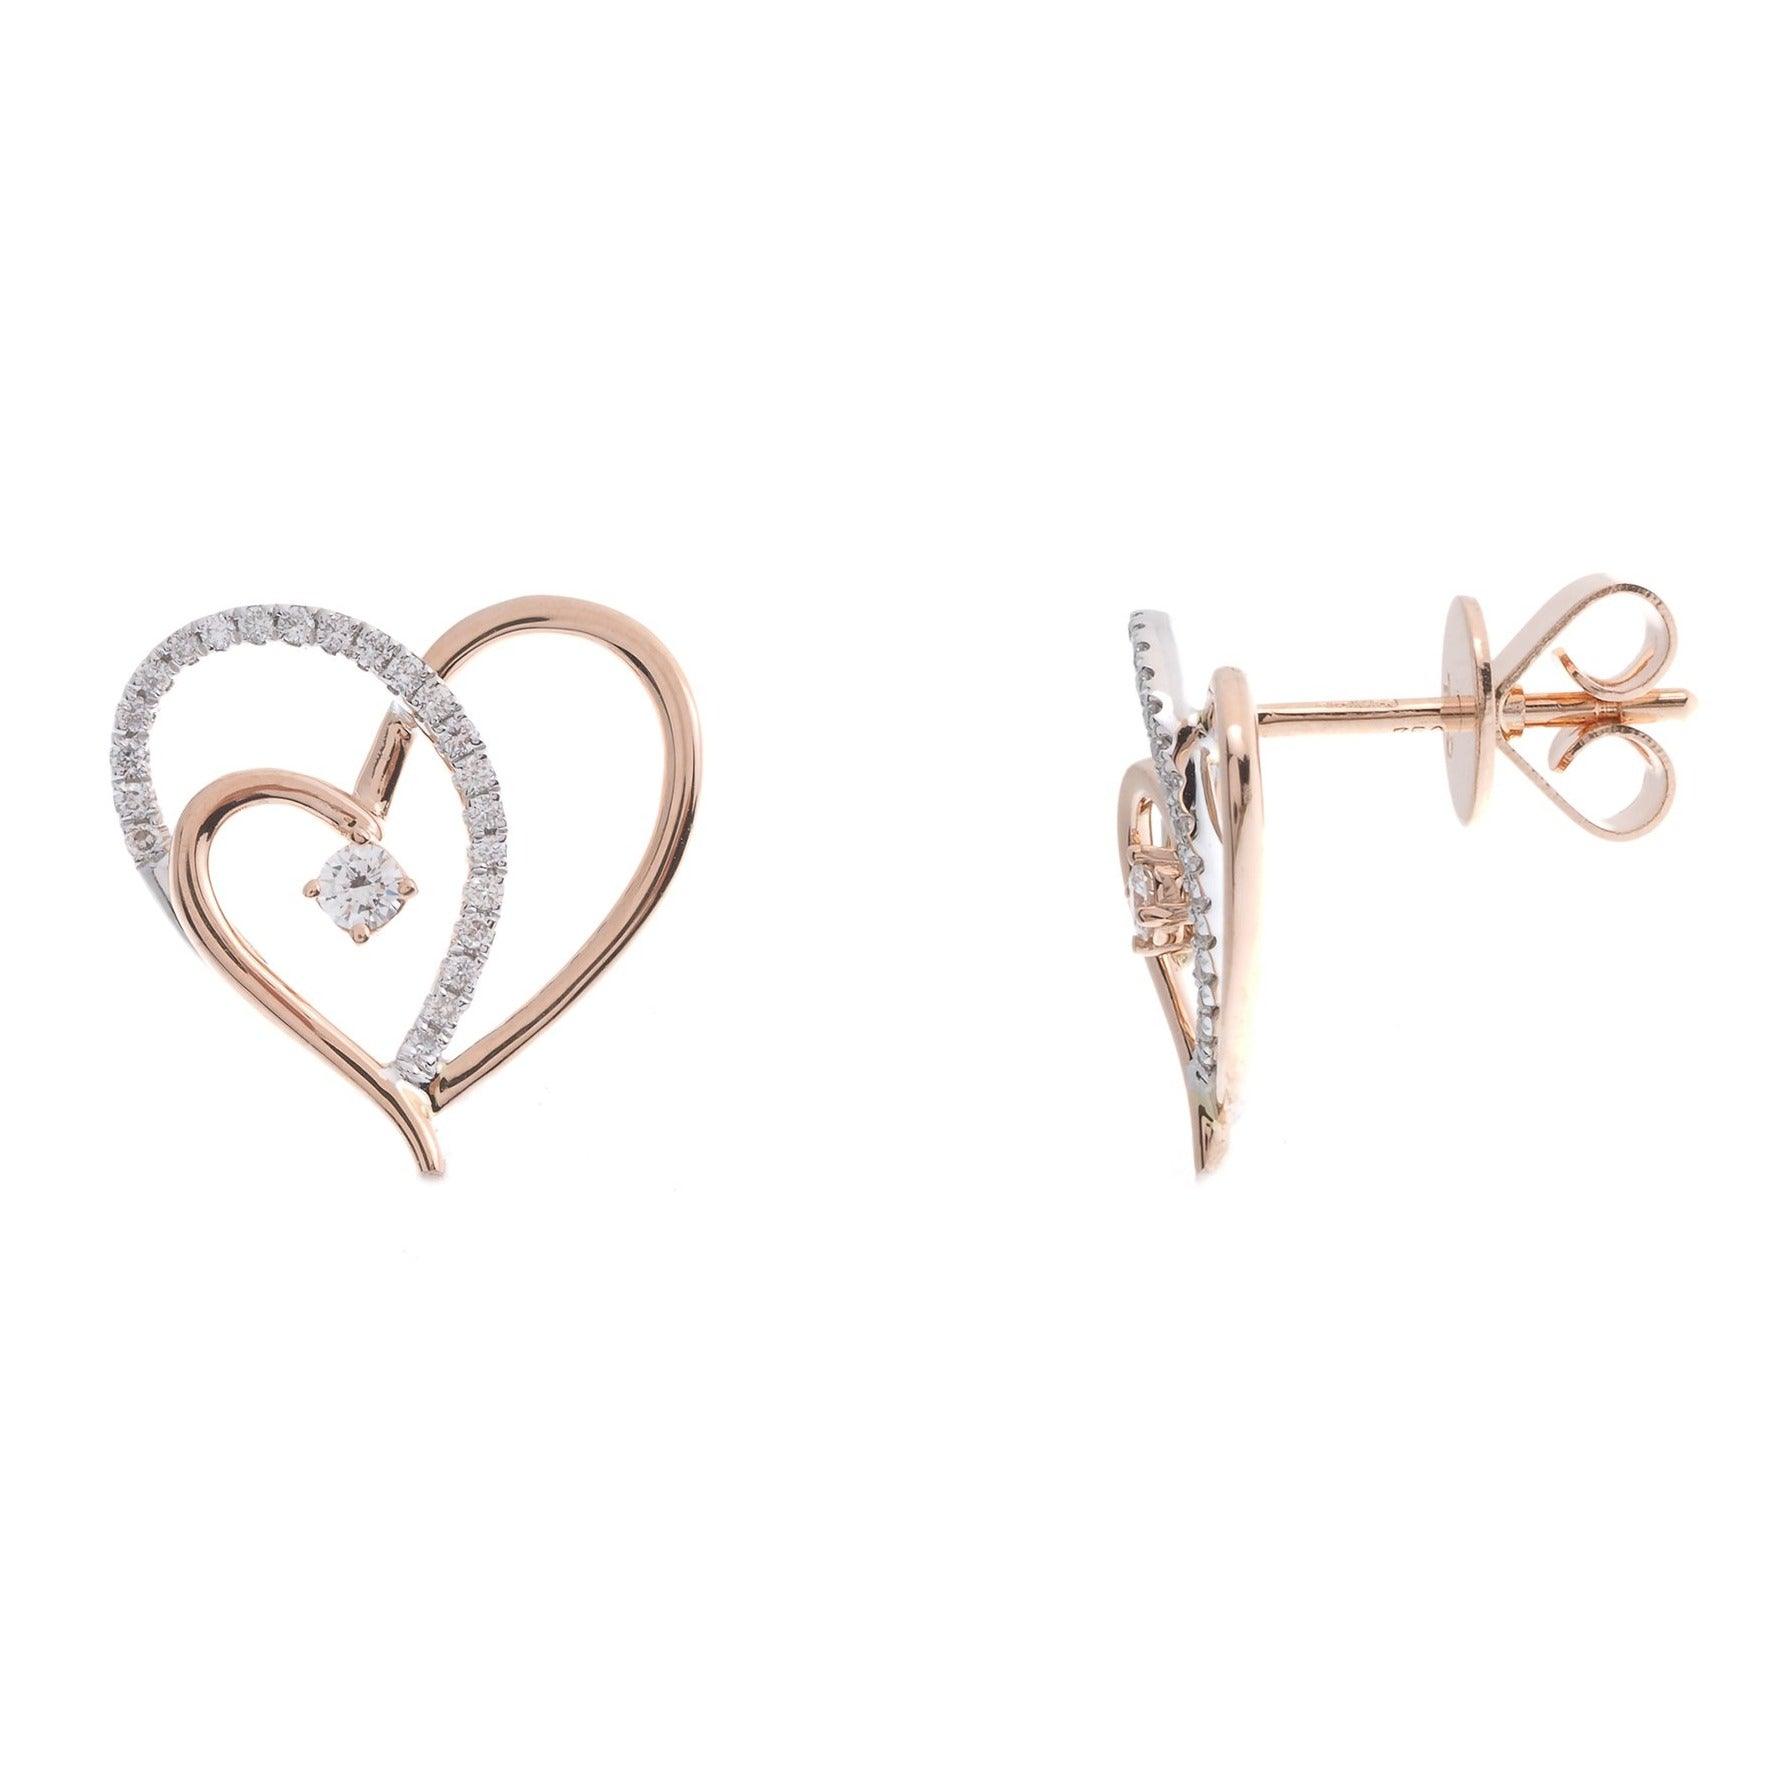 18ct Rose and White Gold Diamond Heart Design Earrings with push backs E43265-1 - Minar Jewellers